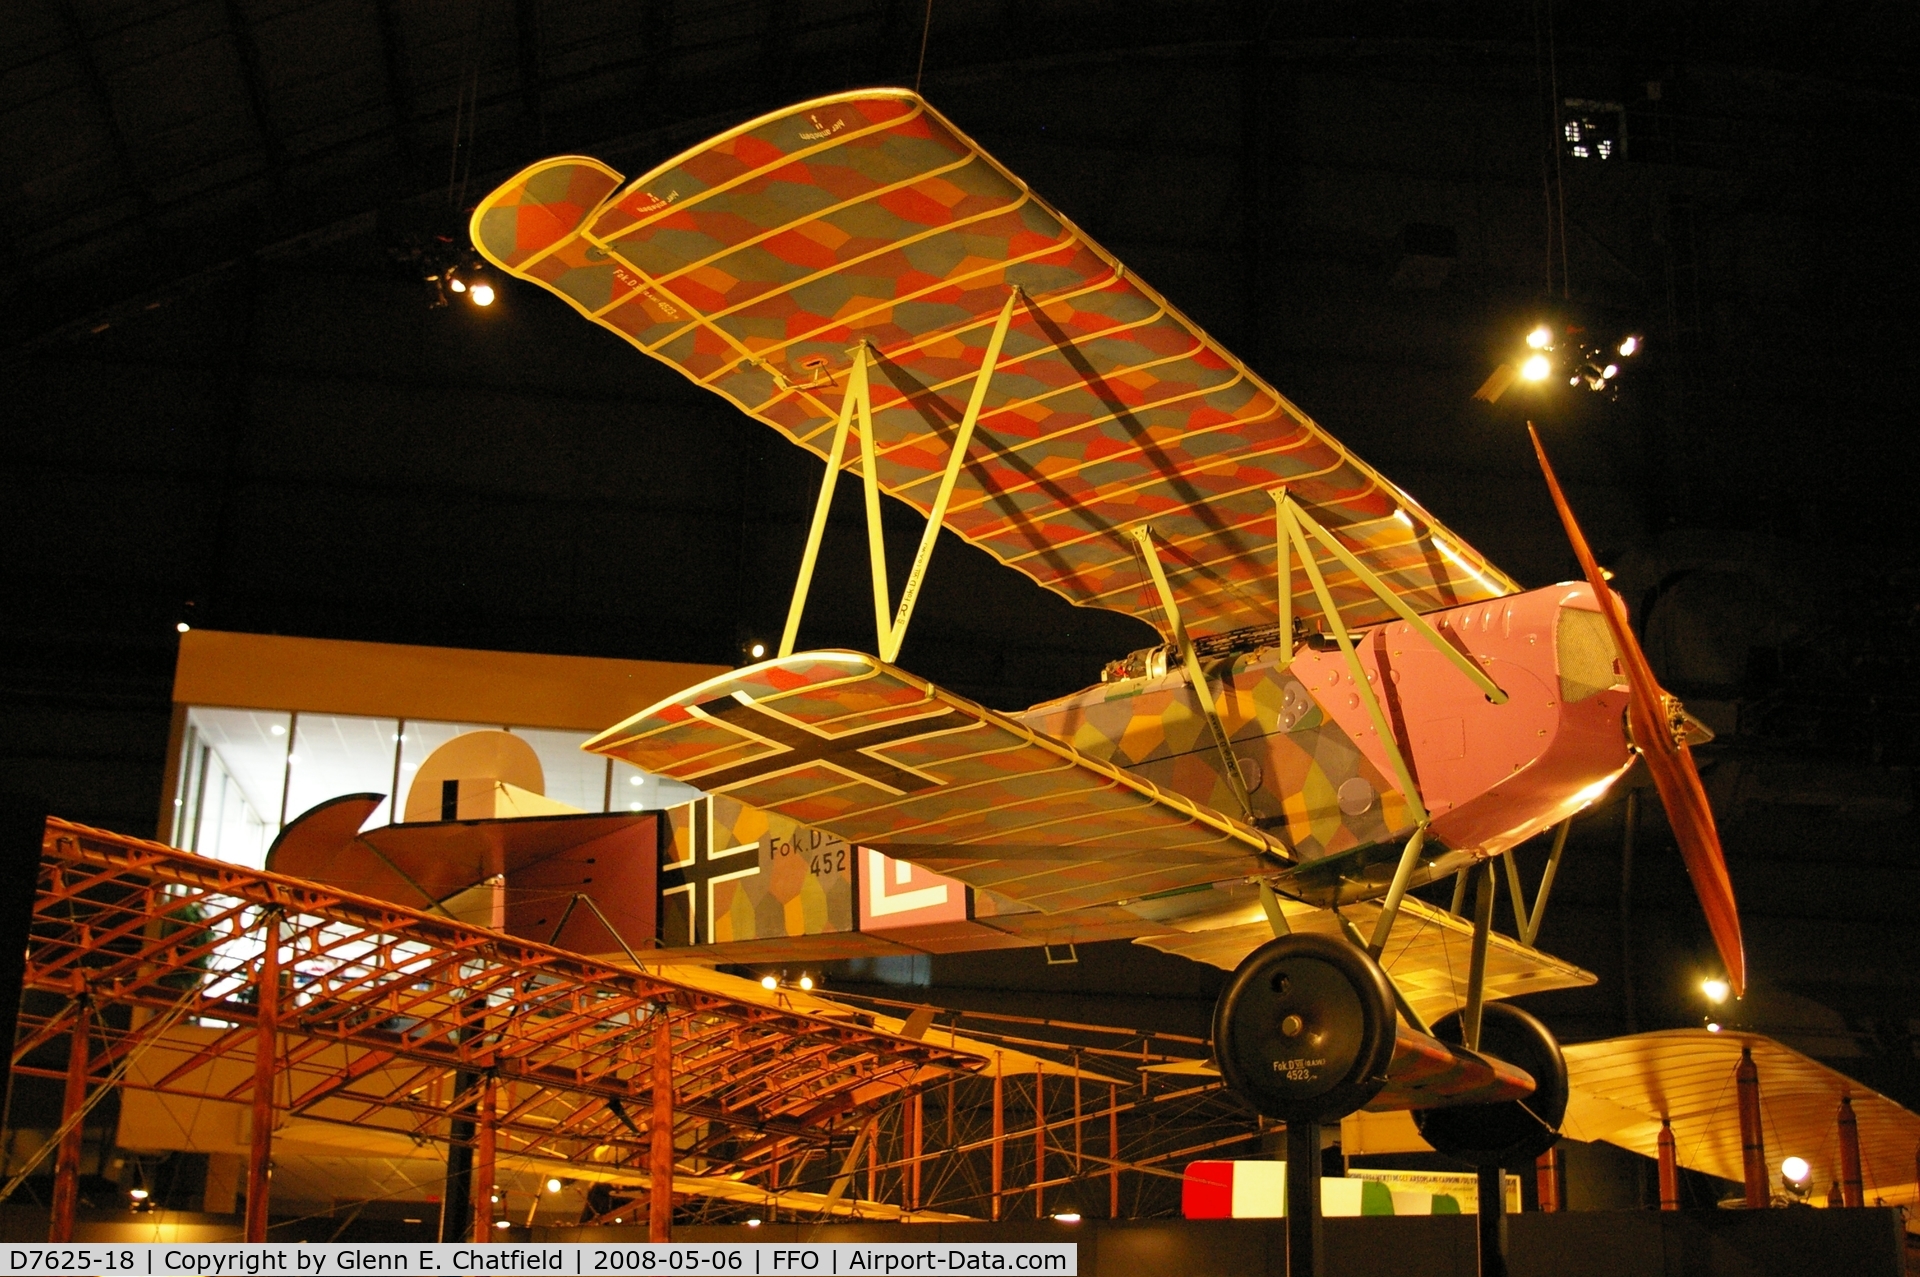 D7625-18, 1918 Fokker D-VII C/N Not found D1875-18, Displayed at the National Museum of the U.S. Air Force